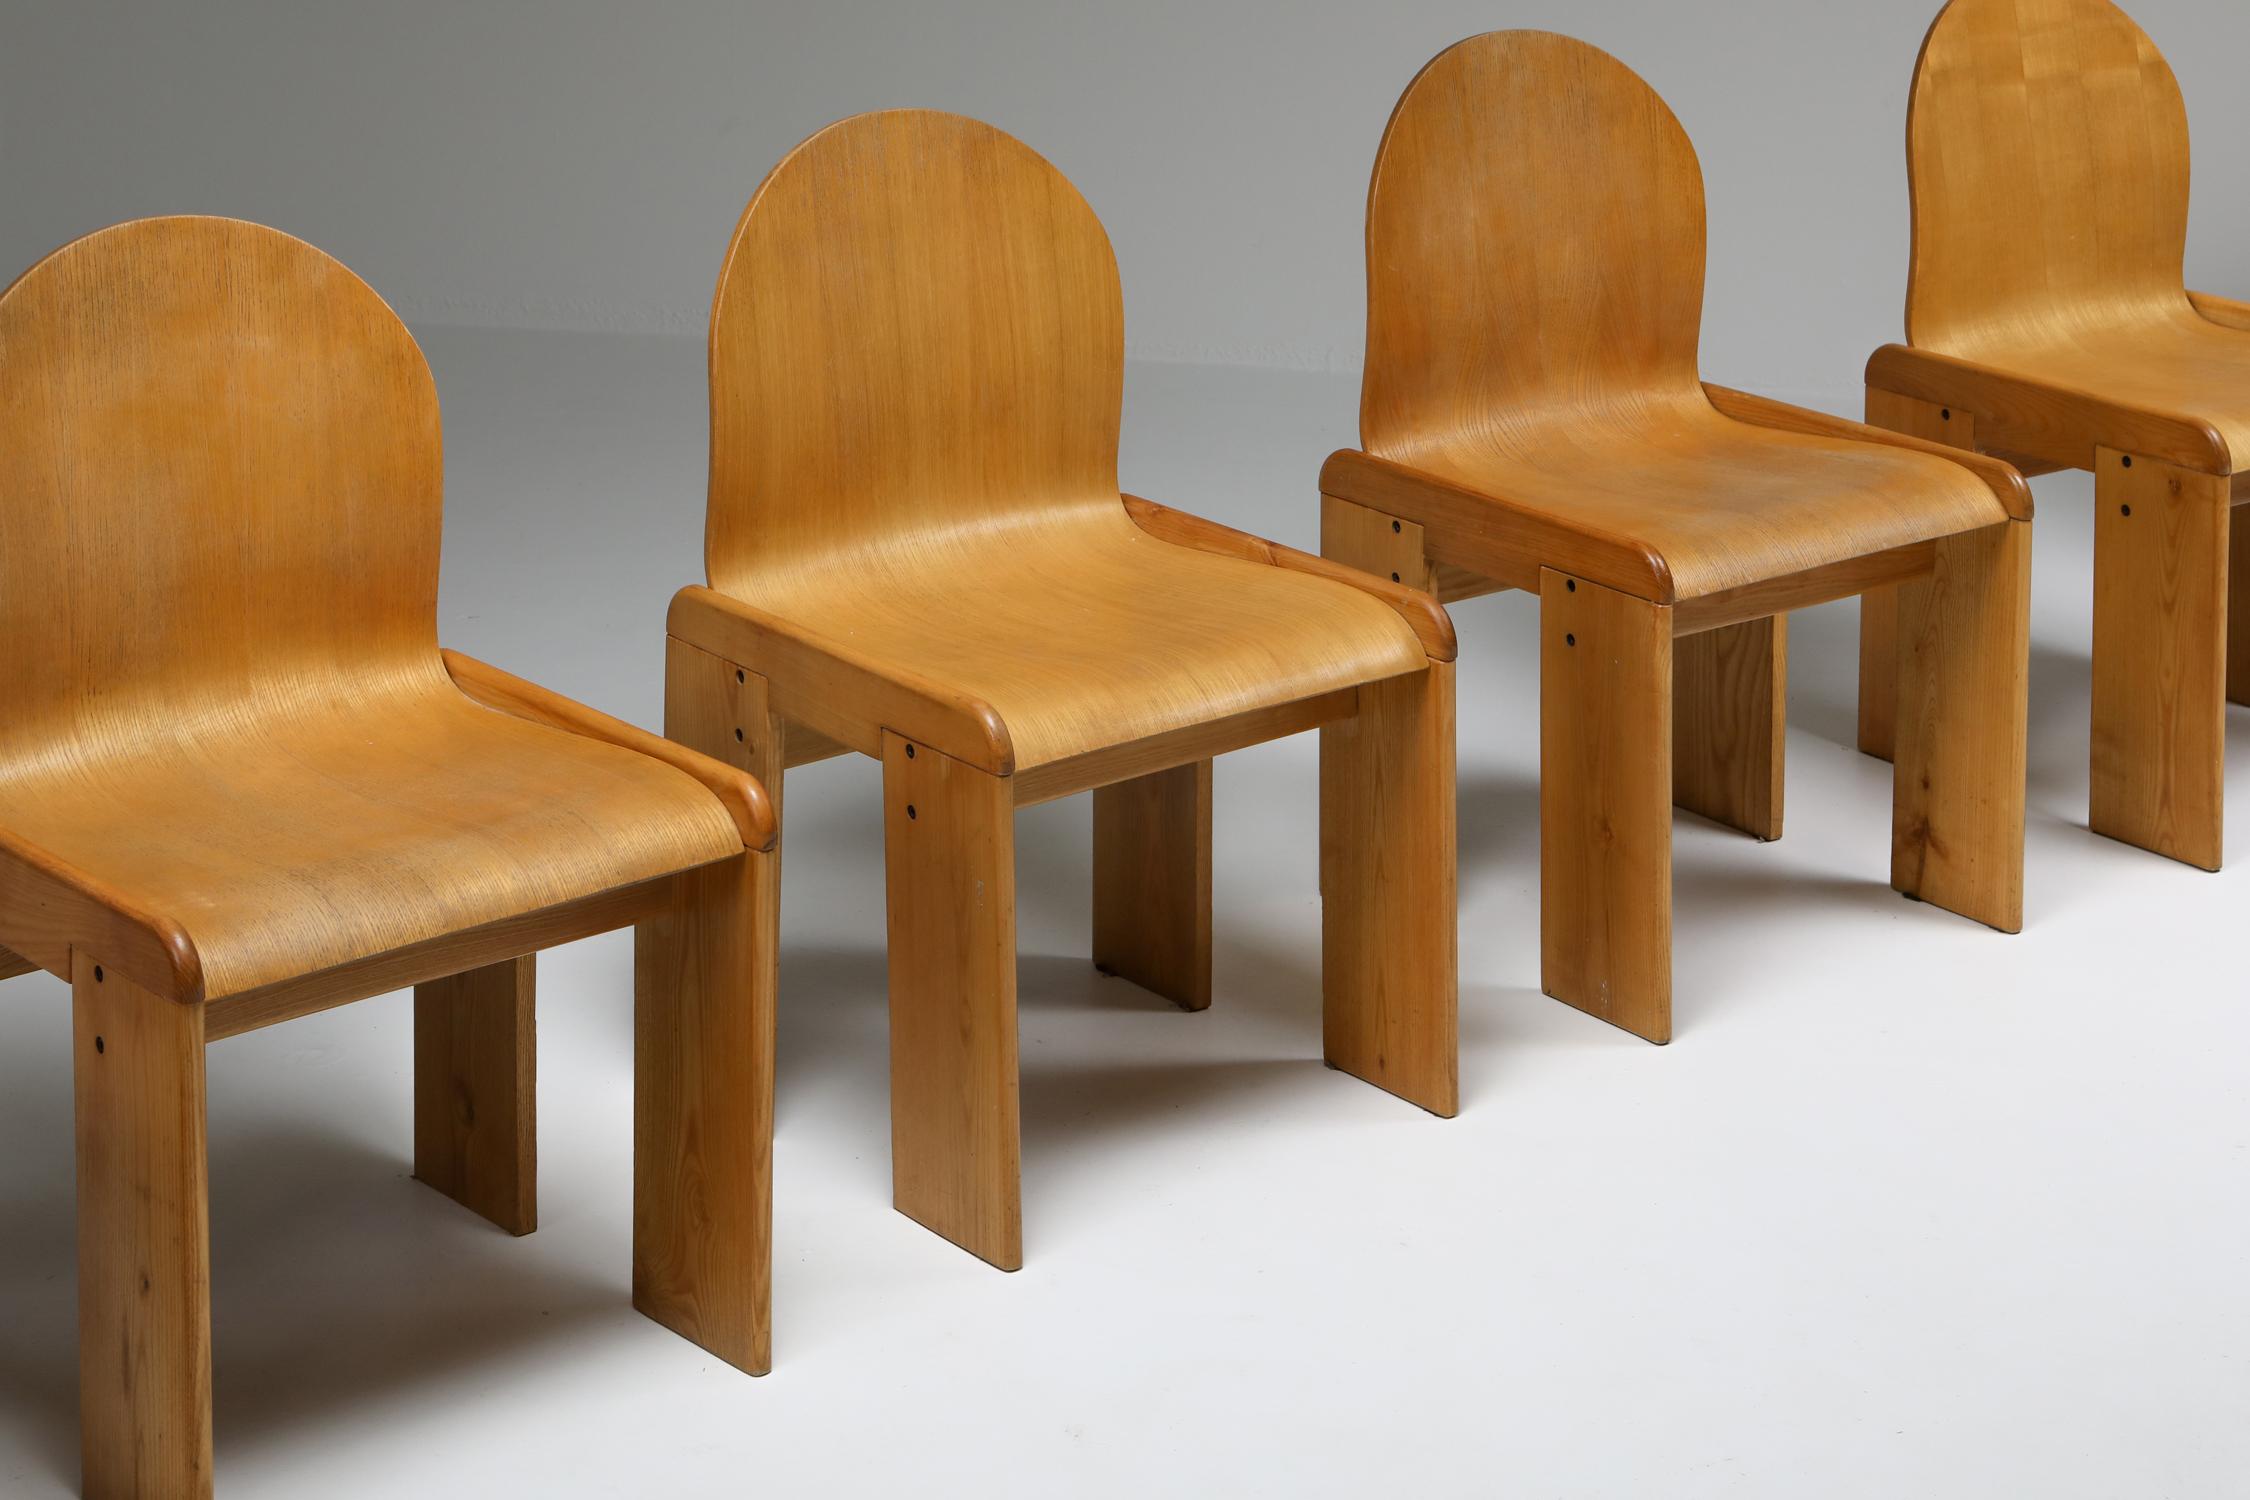 Afra & Tobia Scarpa, plywood dining chairs, set of six, Italy, 1970s

Natural colored wood dining chairs
Would fit great in a Scandinavian Modern inspired decor as in a more rustic modern interior.

The ergonomic plywood seating and back make